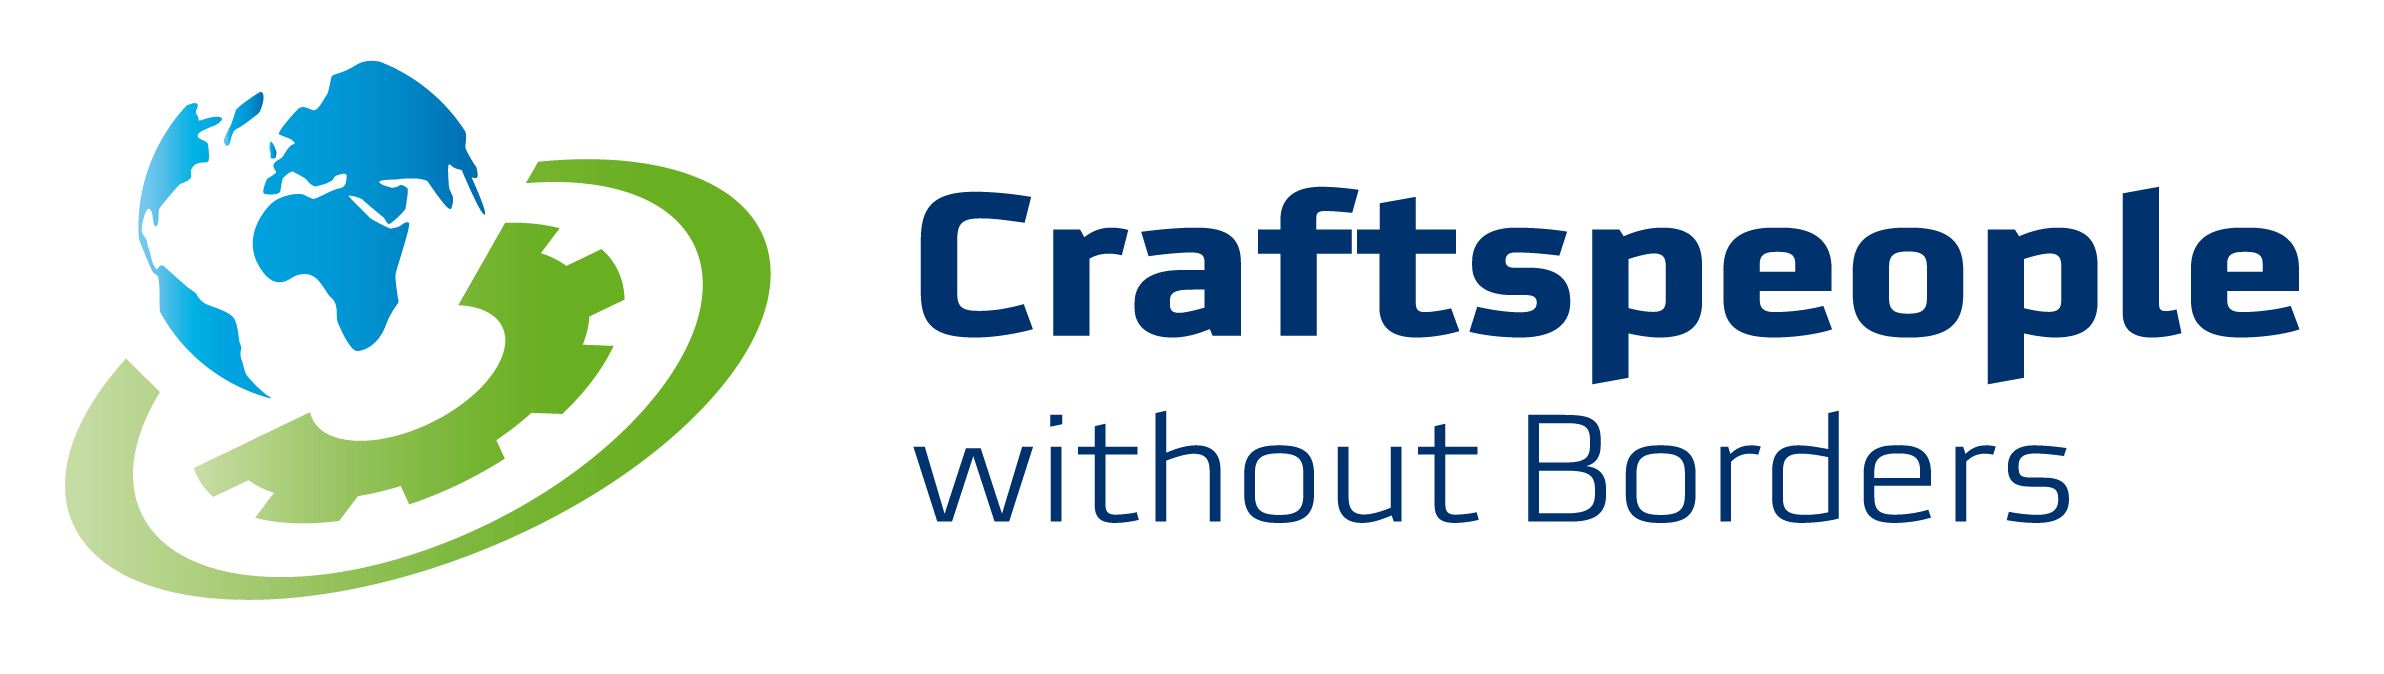 Craftspeople without Borders